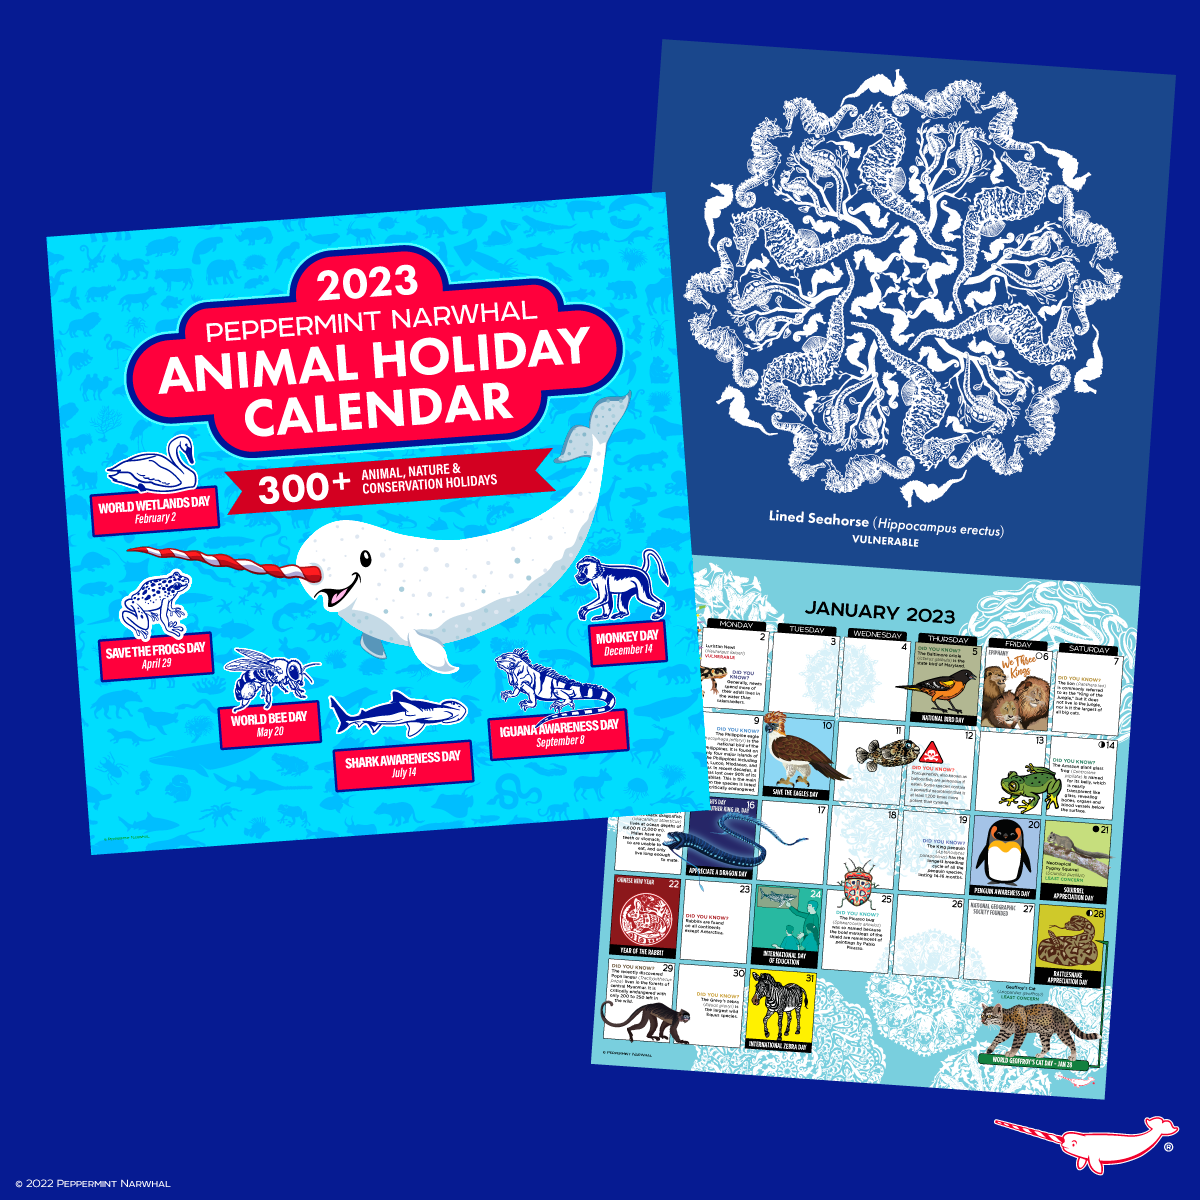 2023 Animal Holiday Calendar Peppermint Narwhal Conservation